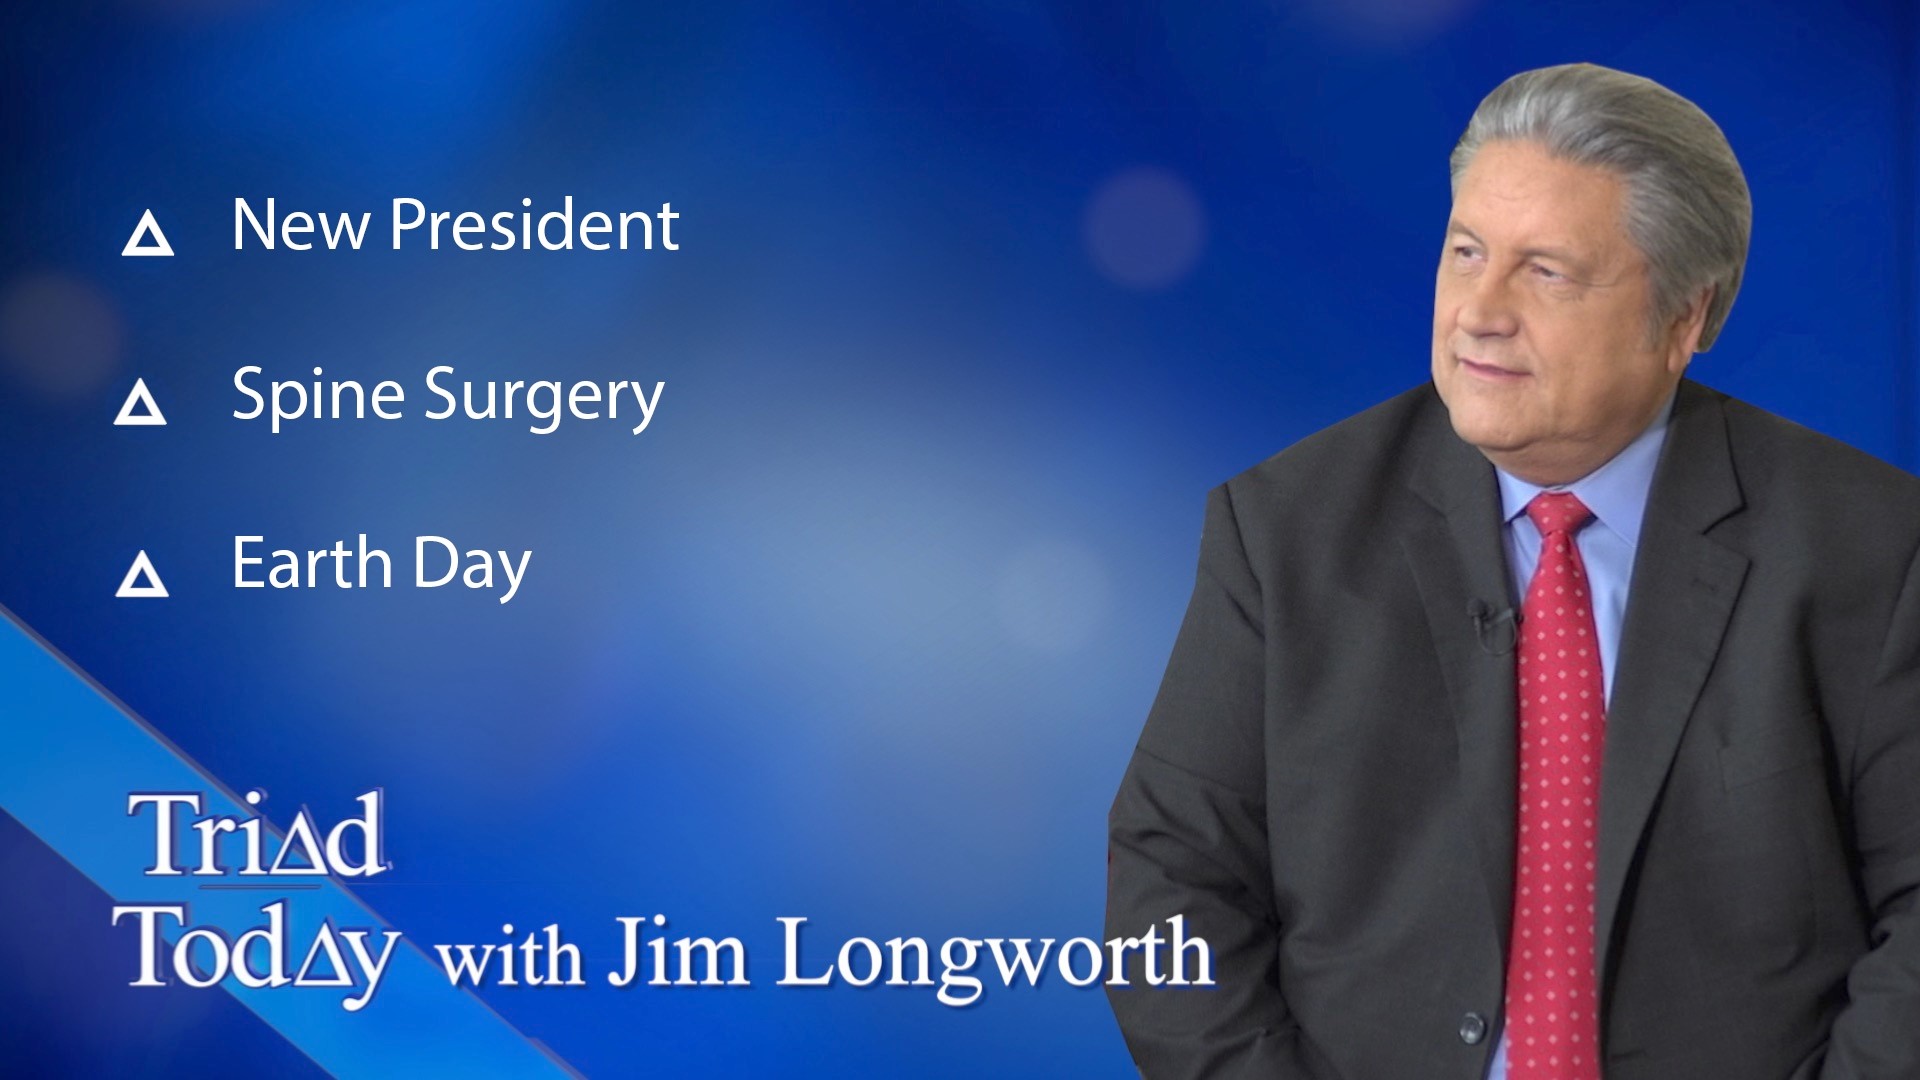 On this episode of Triad Today: New President, Spine Surgery, Earth Day.